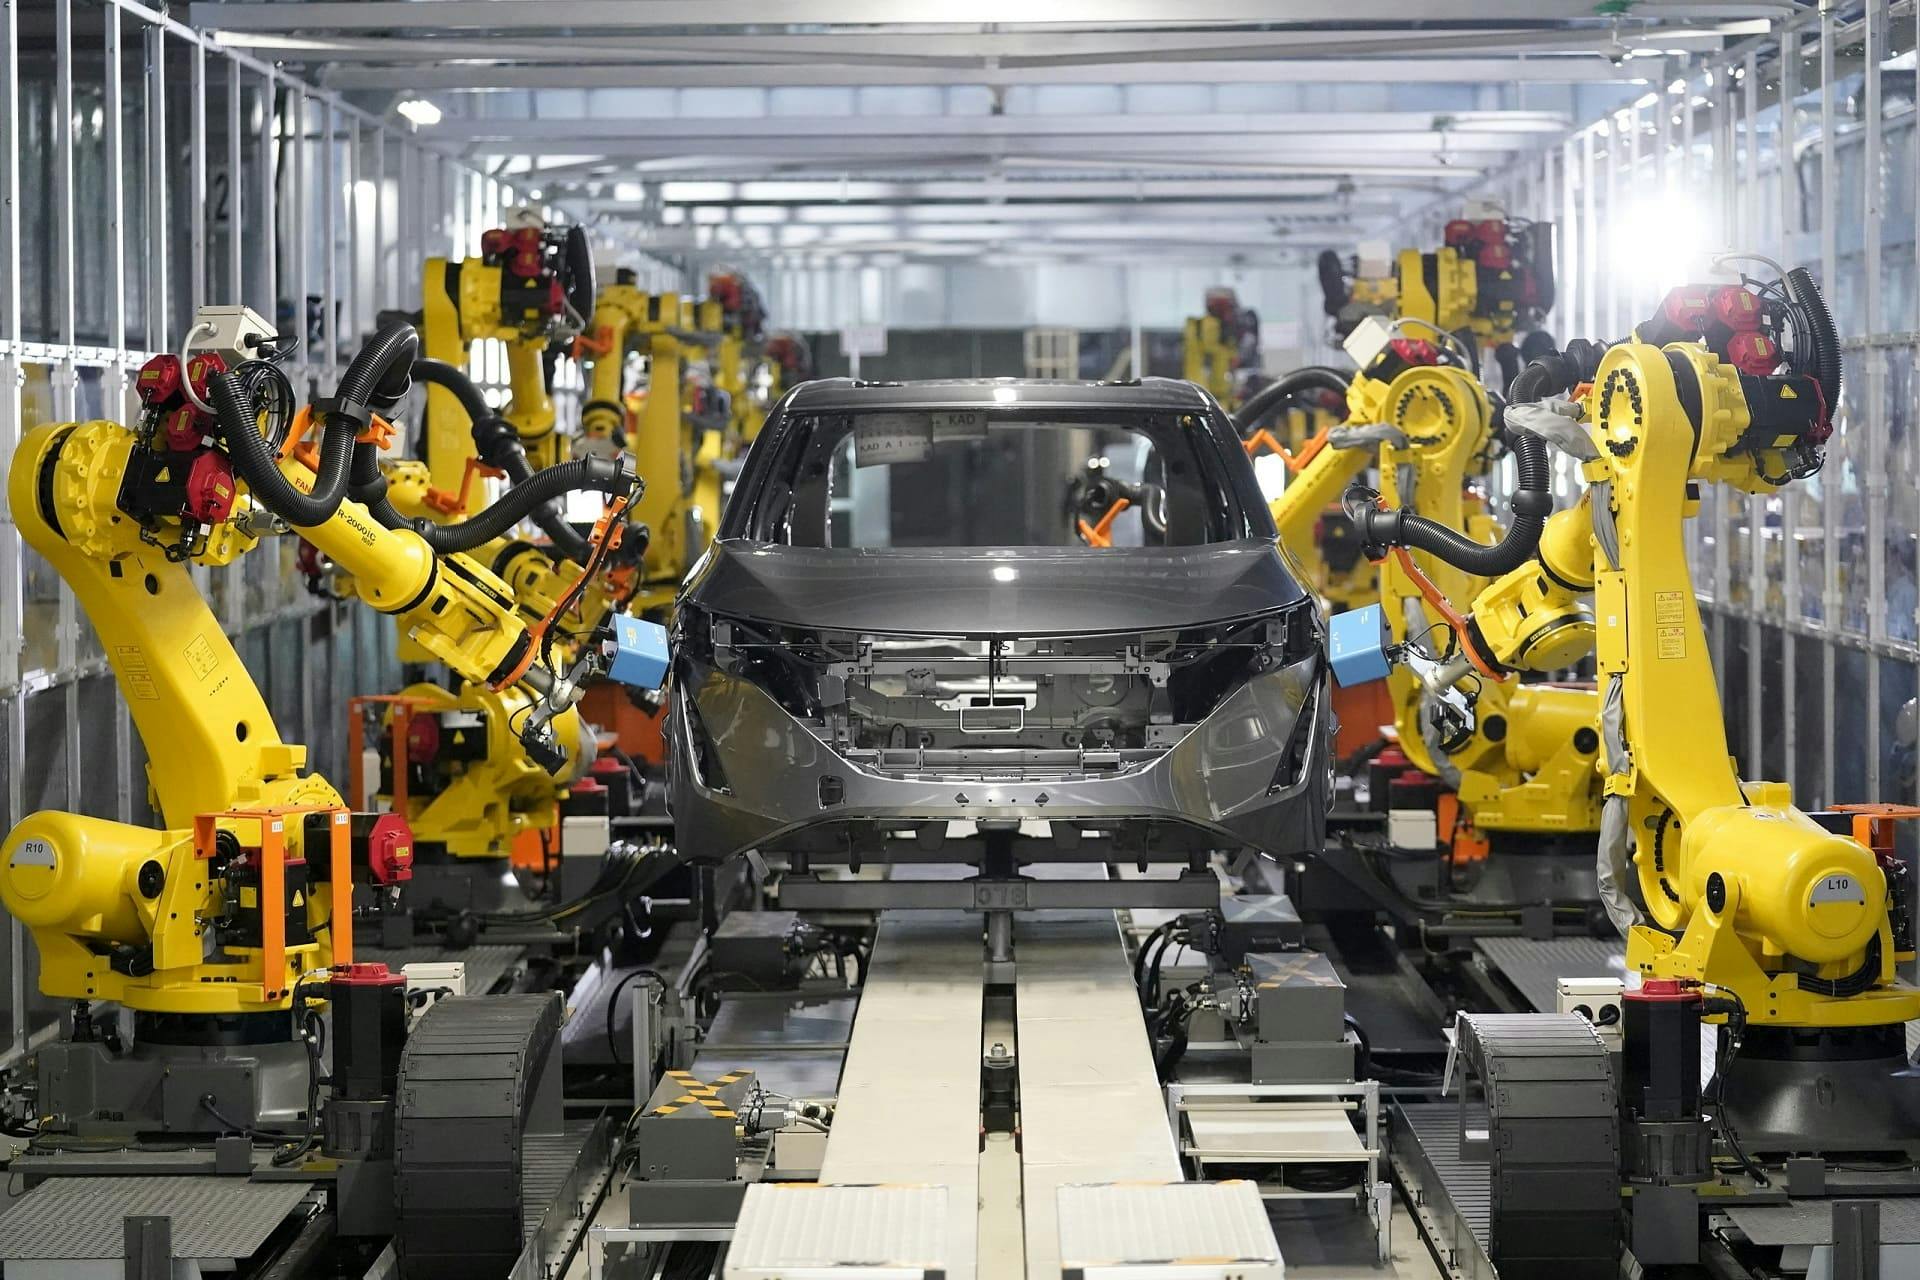 Robots working at Nissan's factory